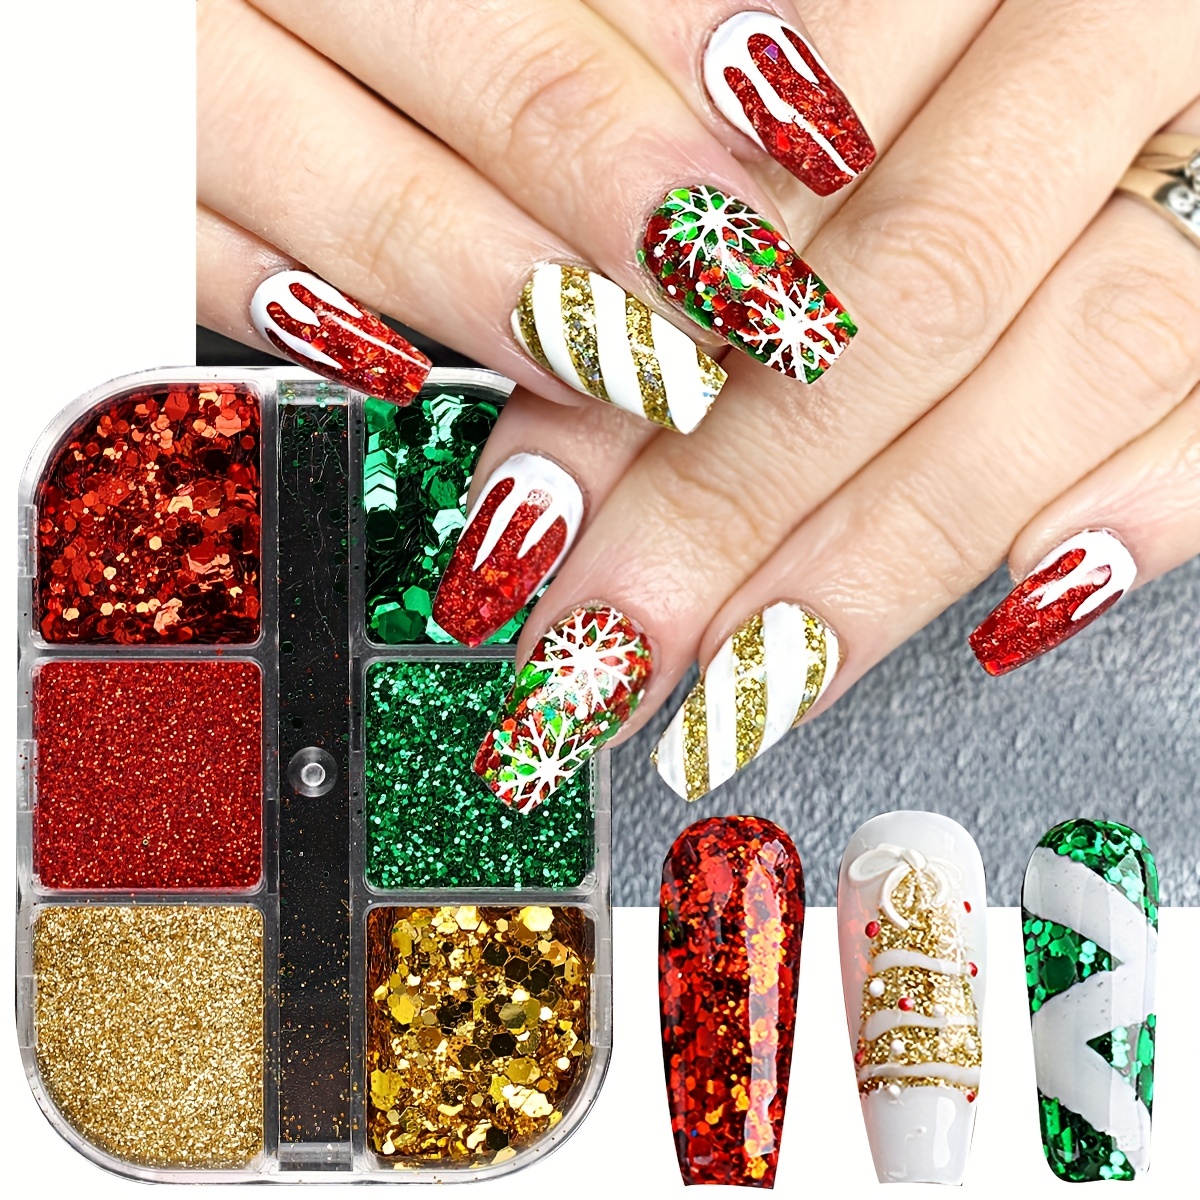 Holographic Winter Snowflake Glitter Flakes Nail Art Decorations Iridescent  White Sequins Manicure Christmas Nails Accessories